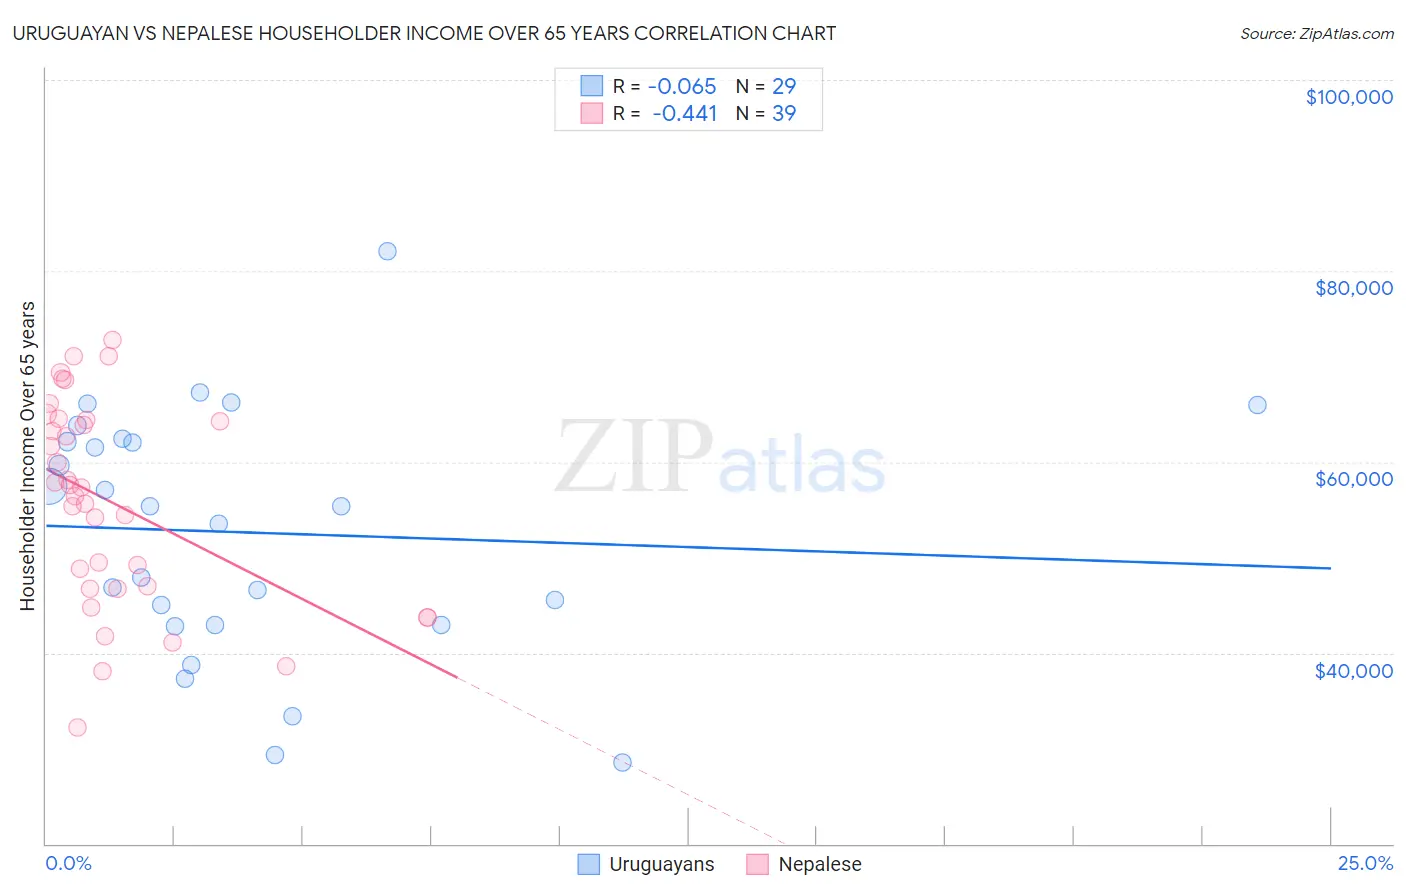 Uruguayan vs Nepalese Householder Income Over 65 years